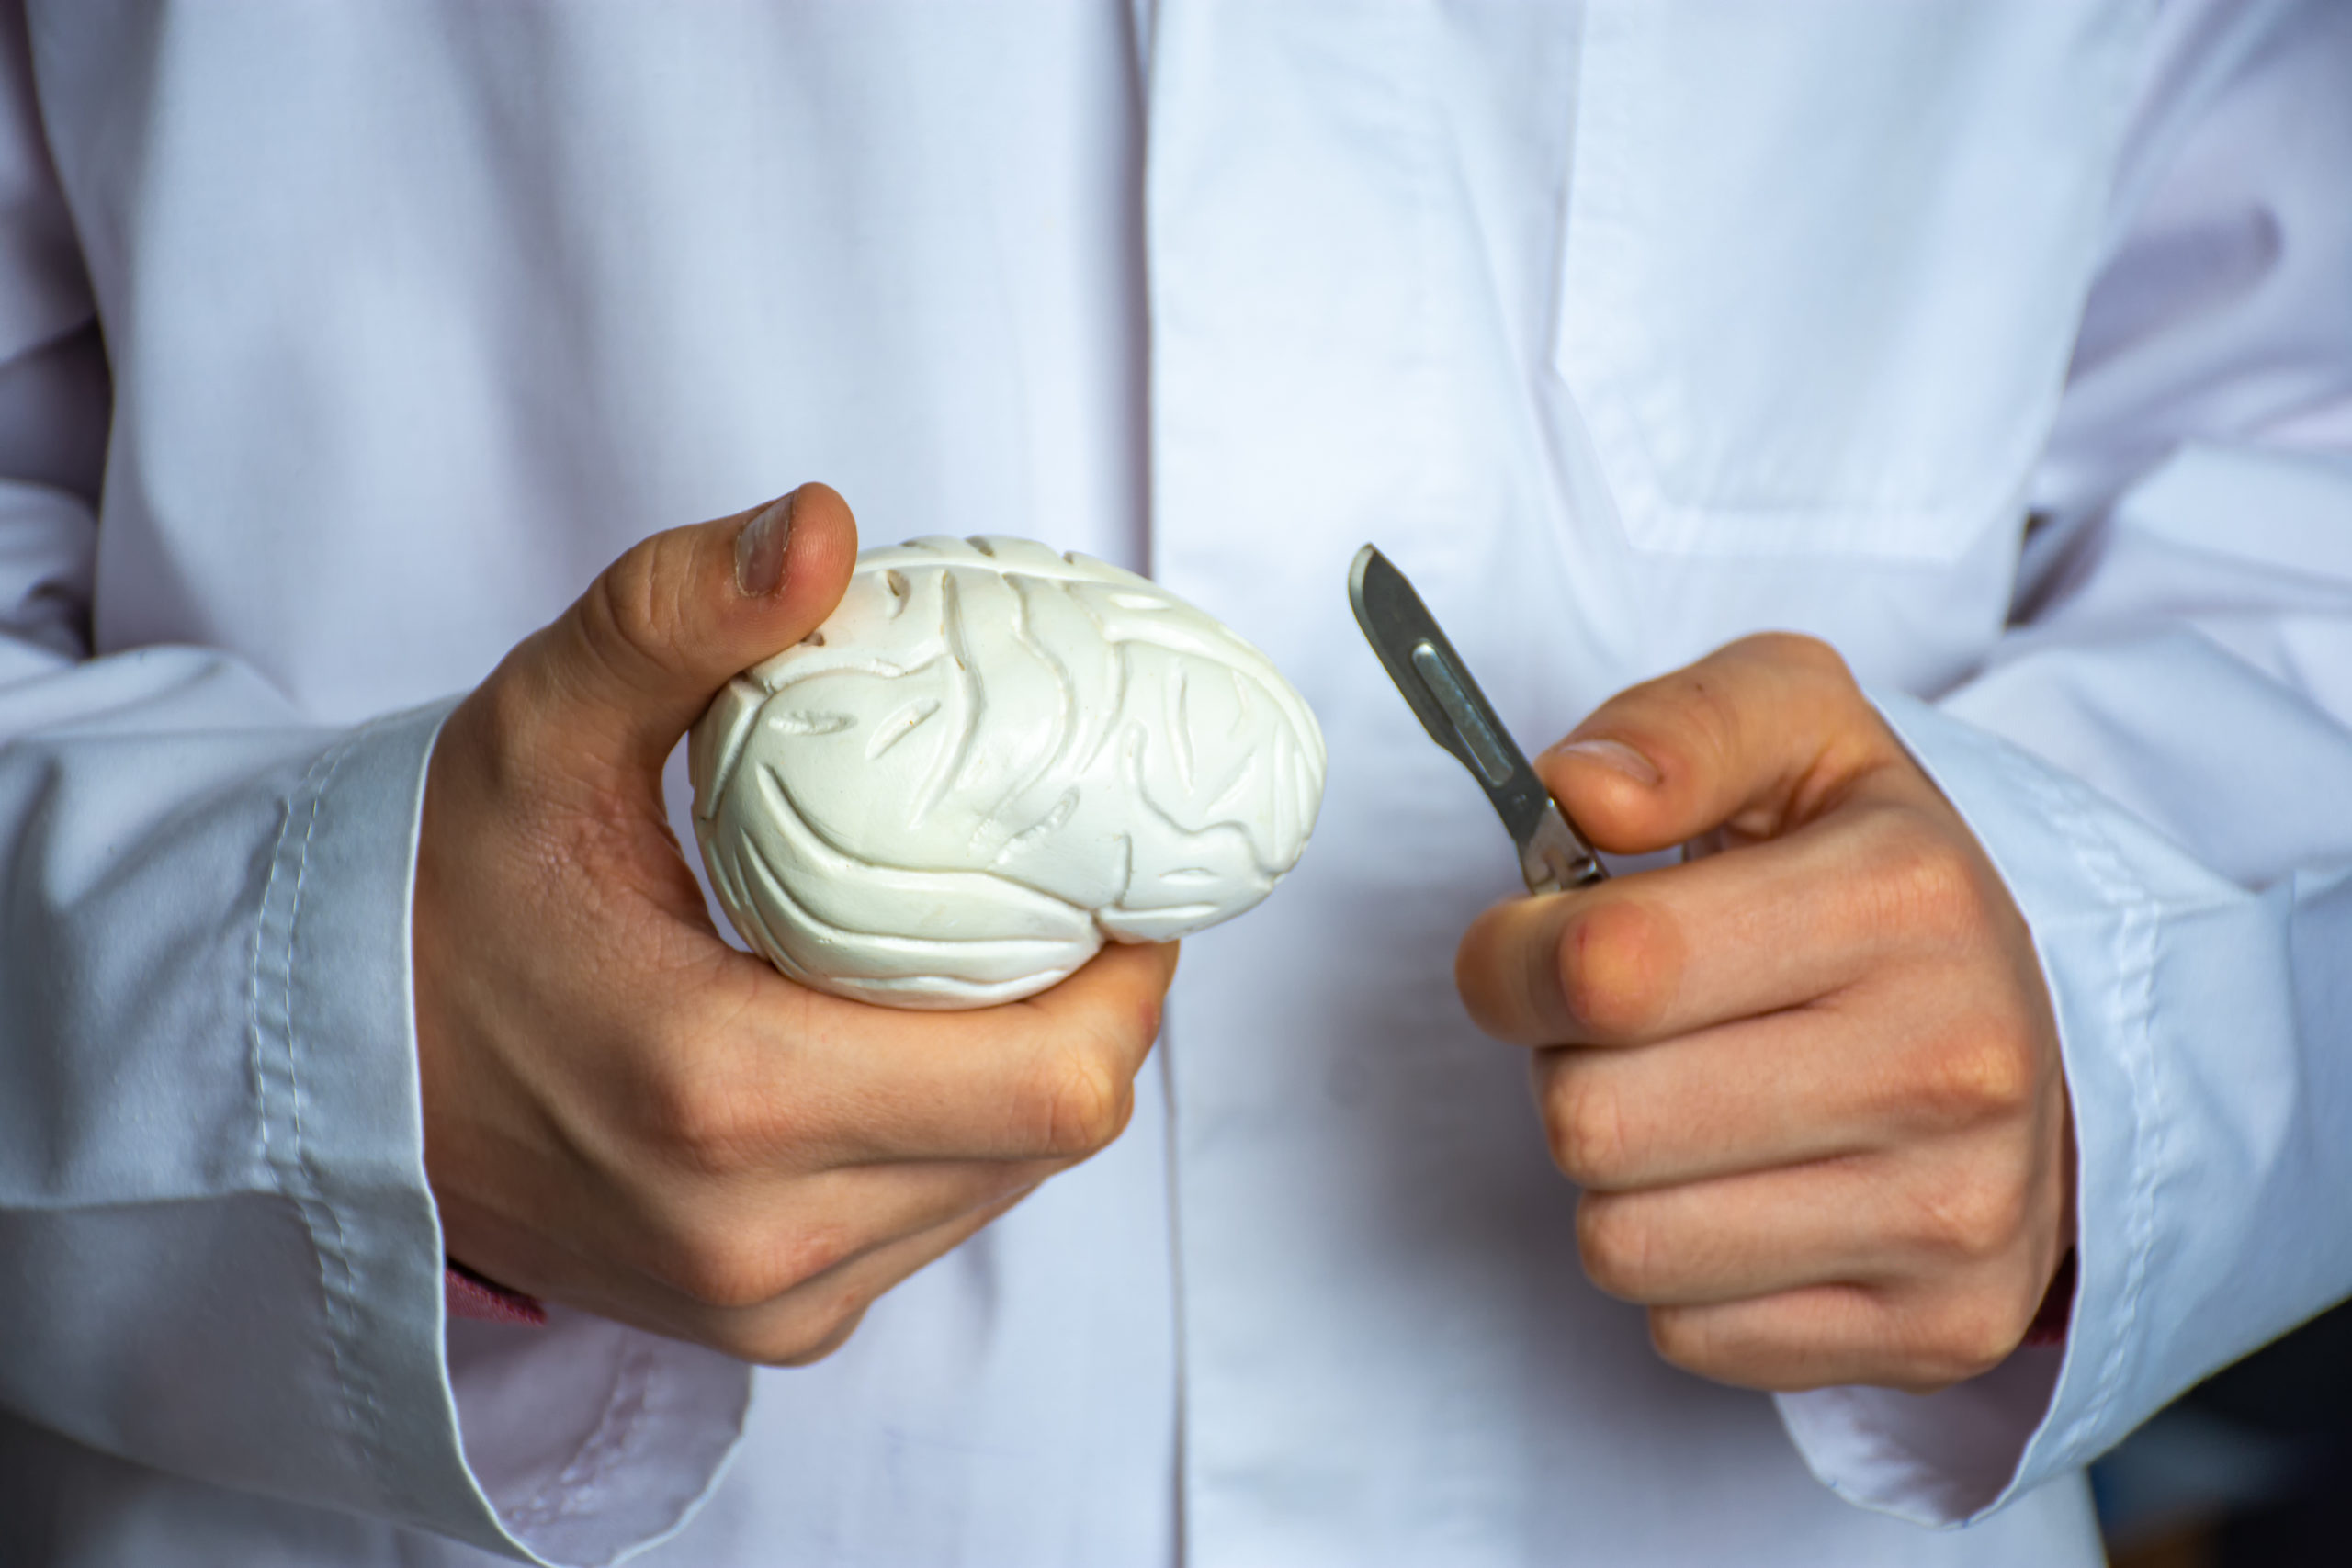 Concept Of Brain Surgery Or Neurosurgery. Neurosurgeon Holding Scalpel In Hand Over 3d Anatomical Model Of Human Brain. Brain Surgery Operations For Treatment Of Diseases Tumor, Aneurysm, Epilepsy